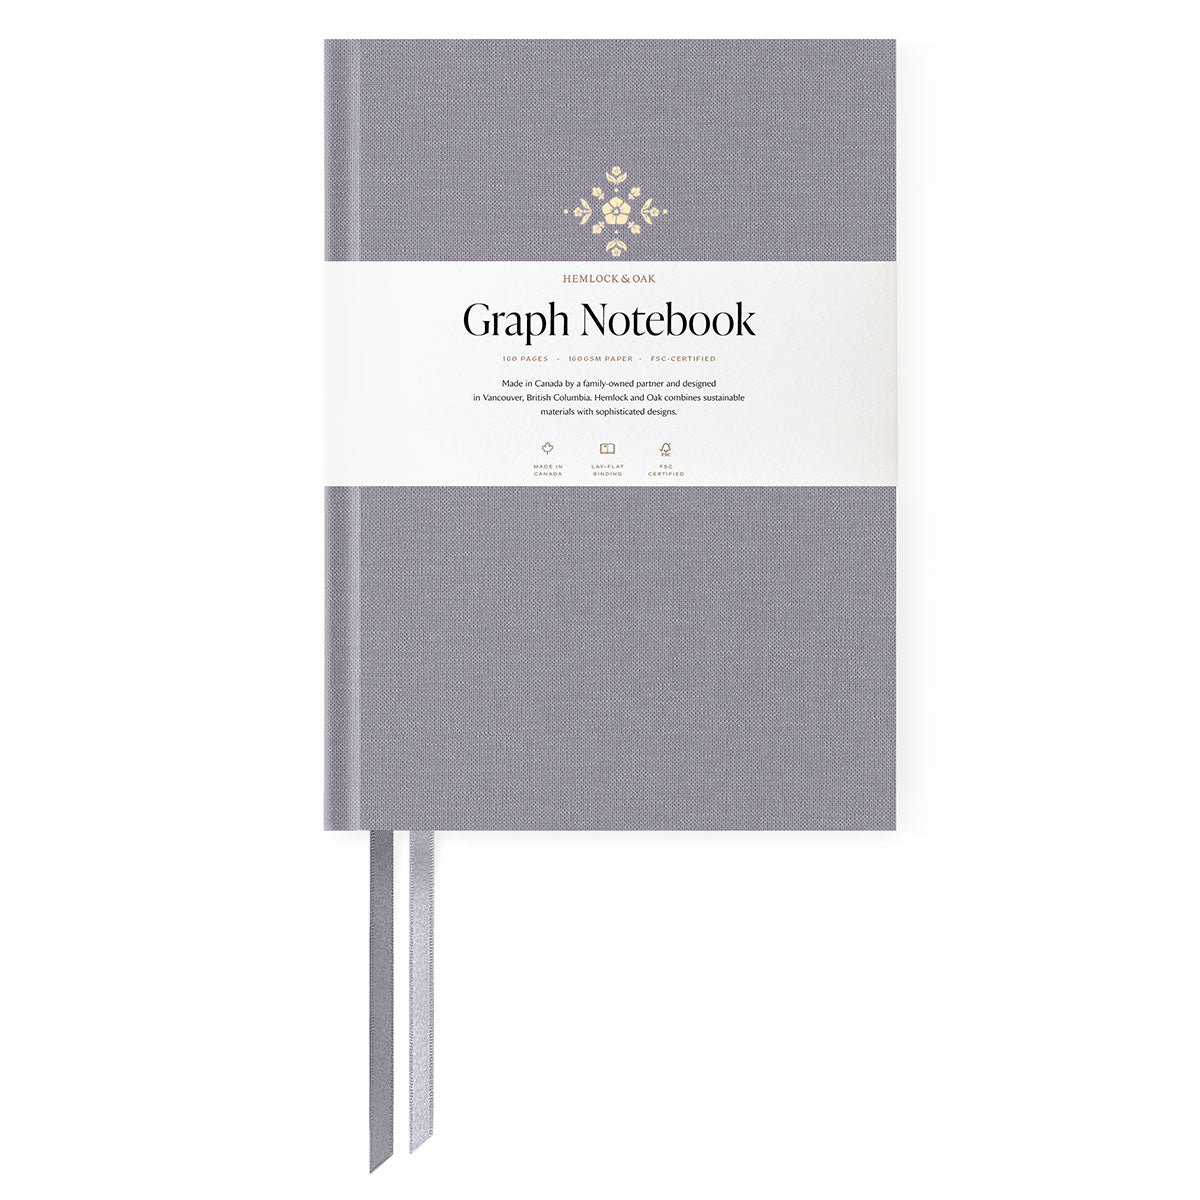 Notebooks (Imperfect) Wisteria - Graph Paper - Jardin Foil - Water Damage on Cover #color_ Wisteria - Graph Paper - Jardin Foil - Water Damage on Cover